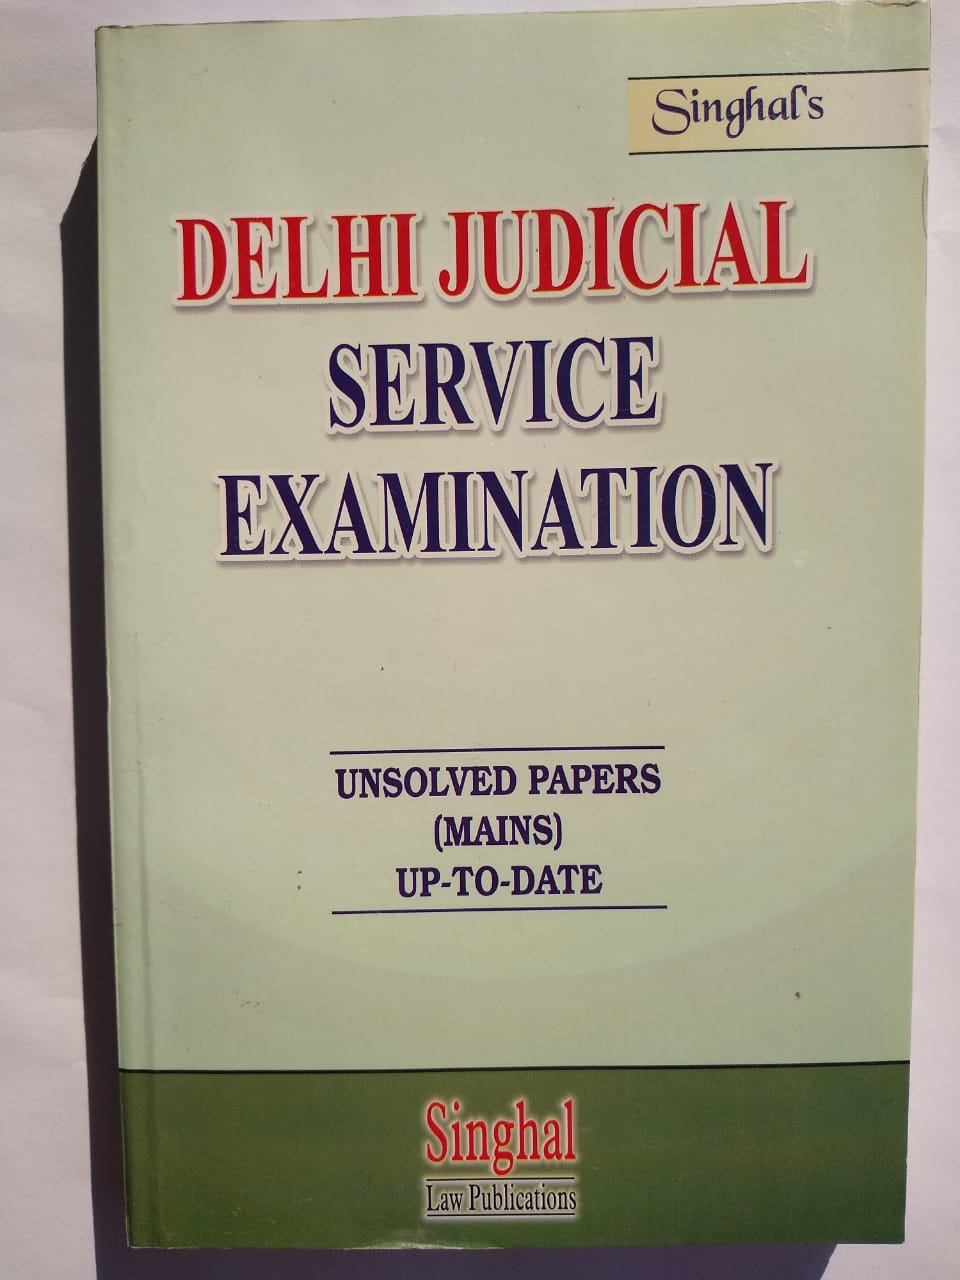 Singhal's Delhi Judicial Service Examination Unsolved Papers Mains